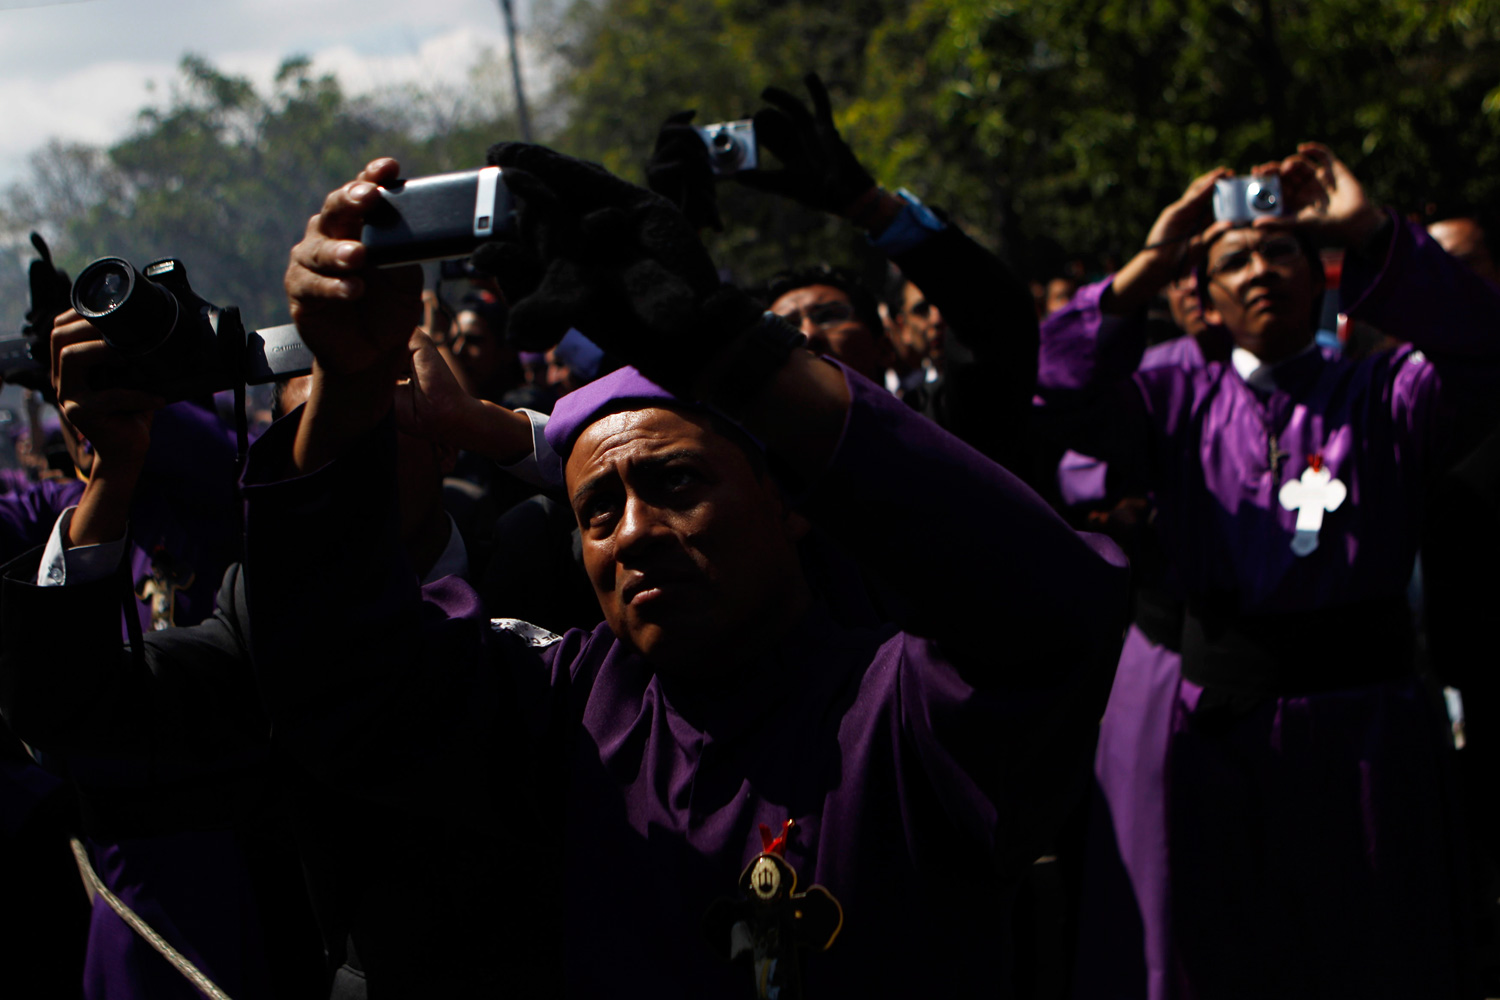 March 4, 2012. Catholics take pictures of a statue of Jesus Nazareno during a procession to mark the second Sunday of Lent, in the streets of Guatemala City.